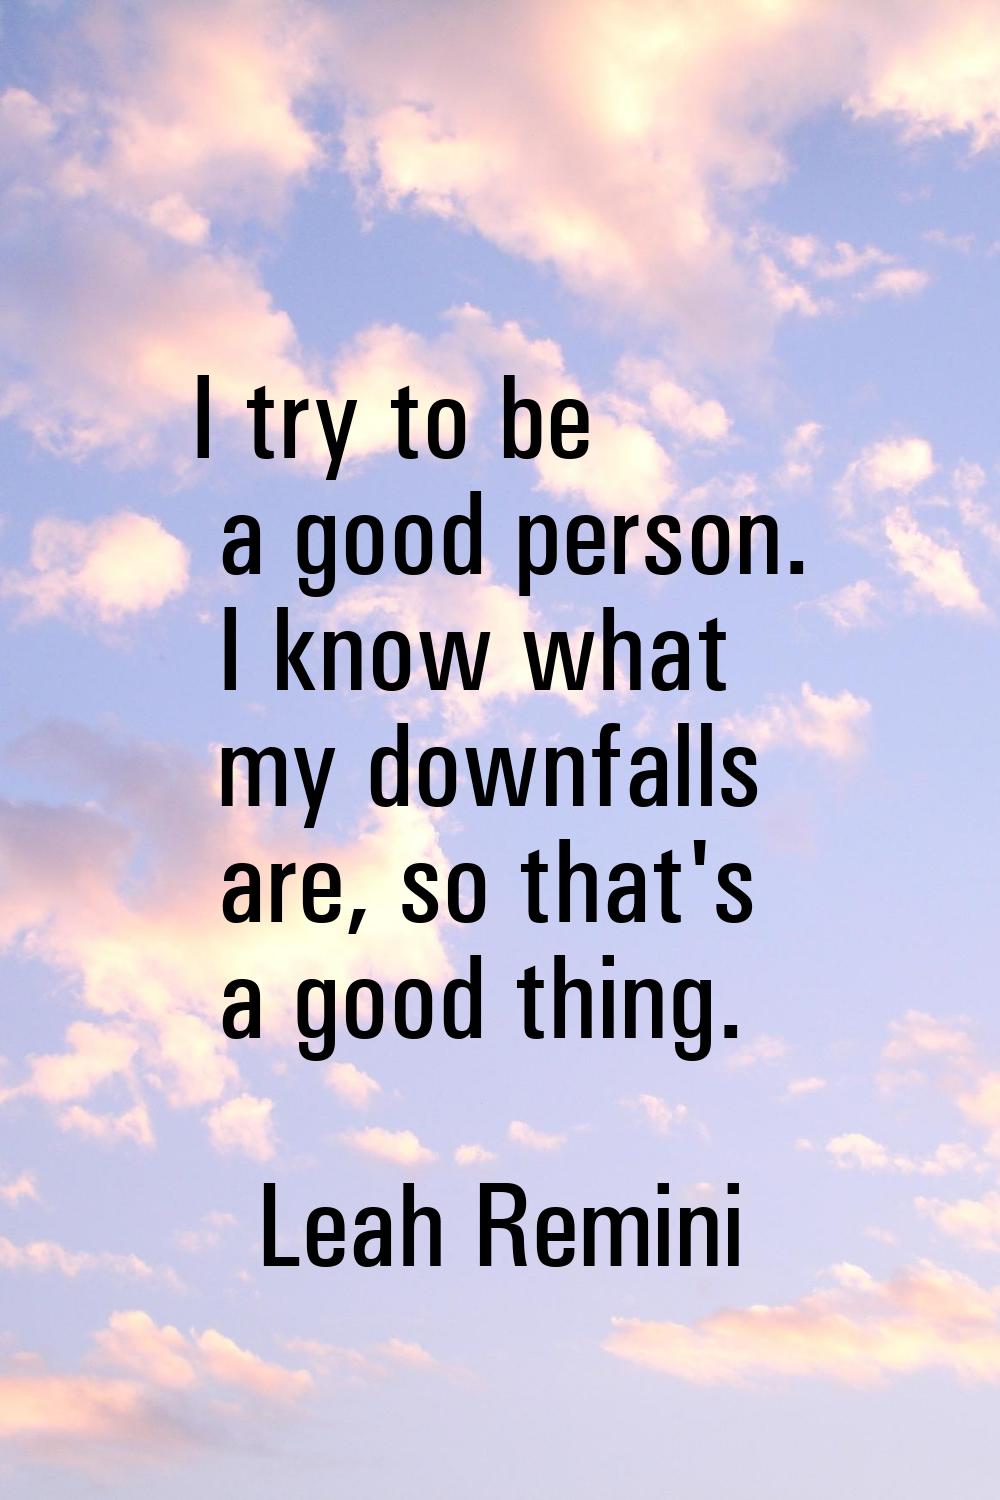 I try to be a good person. I know what my downfalls are, so that's a good thing.